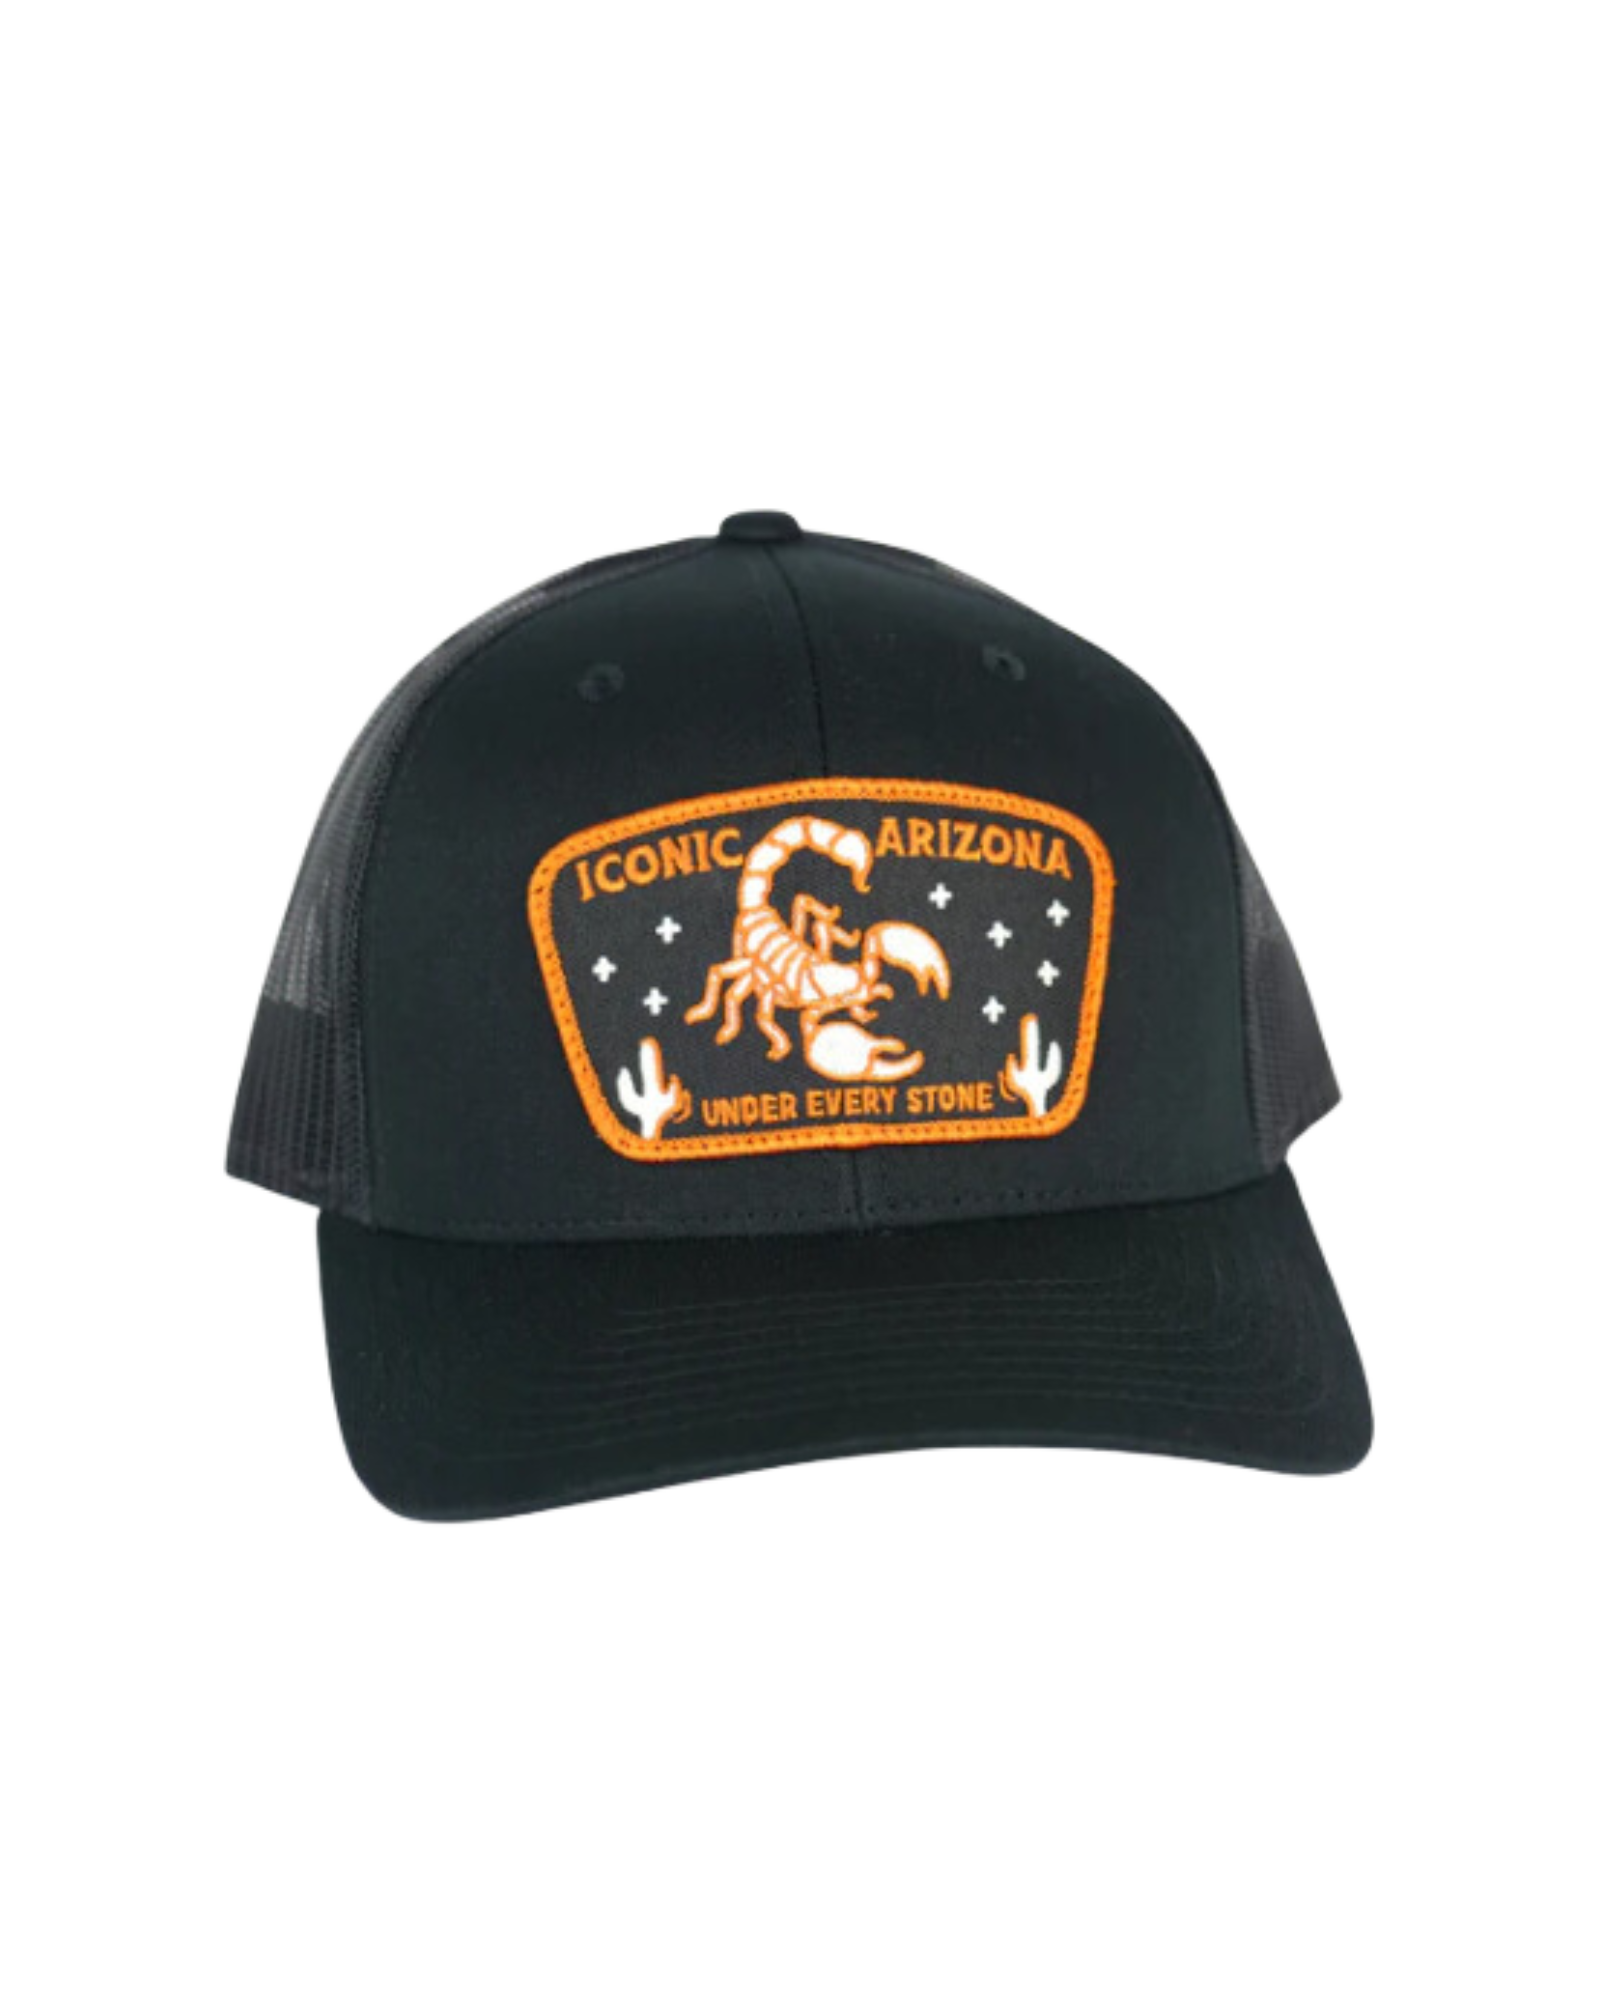 Under Every Stone Curved Trucker Hat